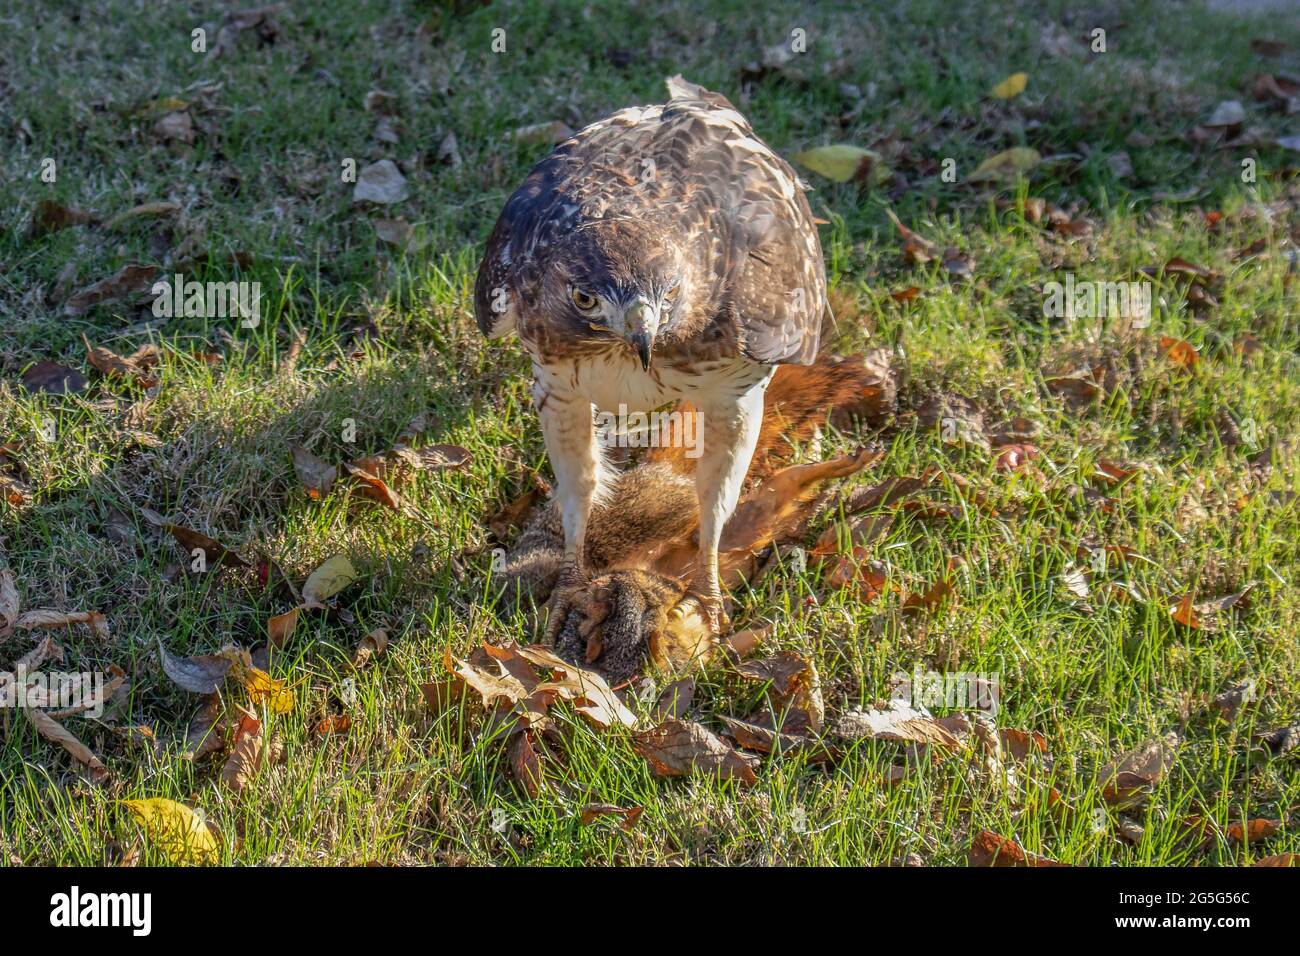 Red tailed hawk standing on dead squirrel it is eating with claws clutched around its head in grass with fall leaves Stock Photo